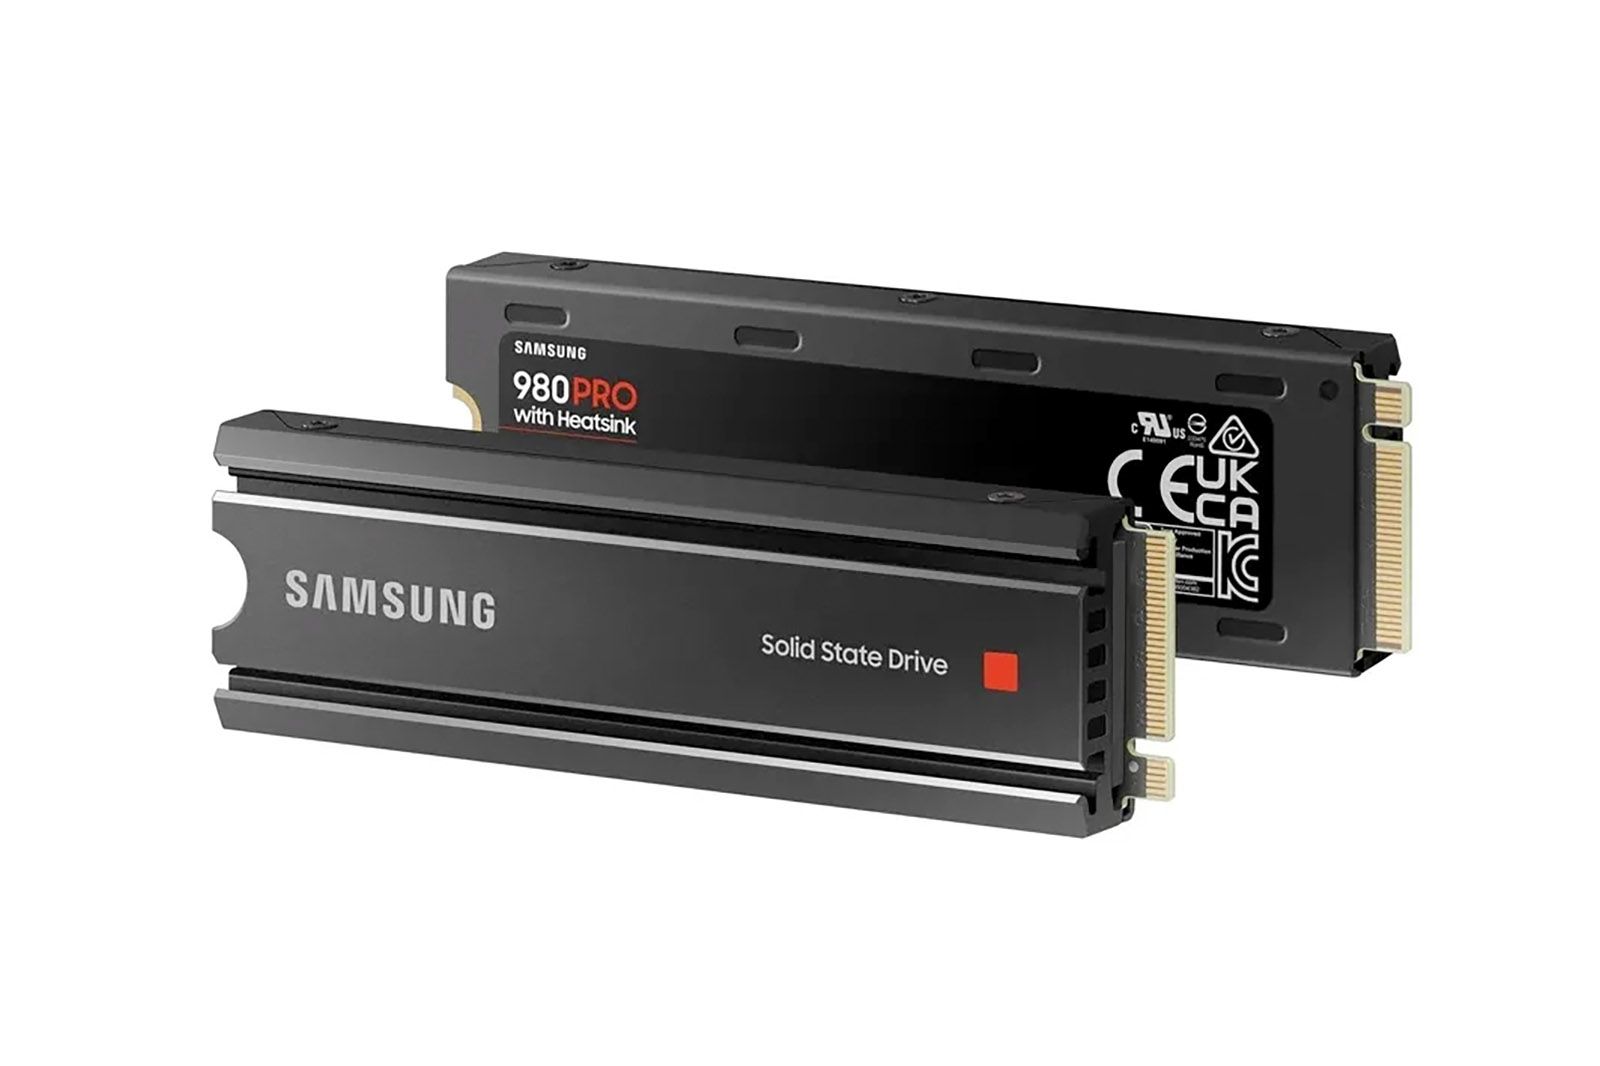 Upgrade your PS5 storage for less with this Samsung 980 Pro SSD deal photo 1